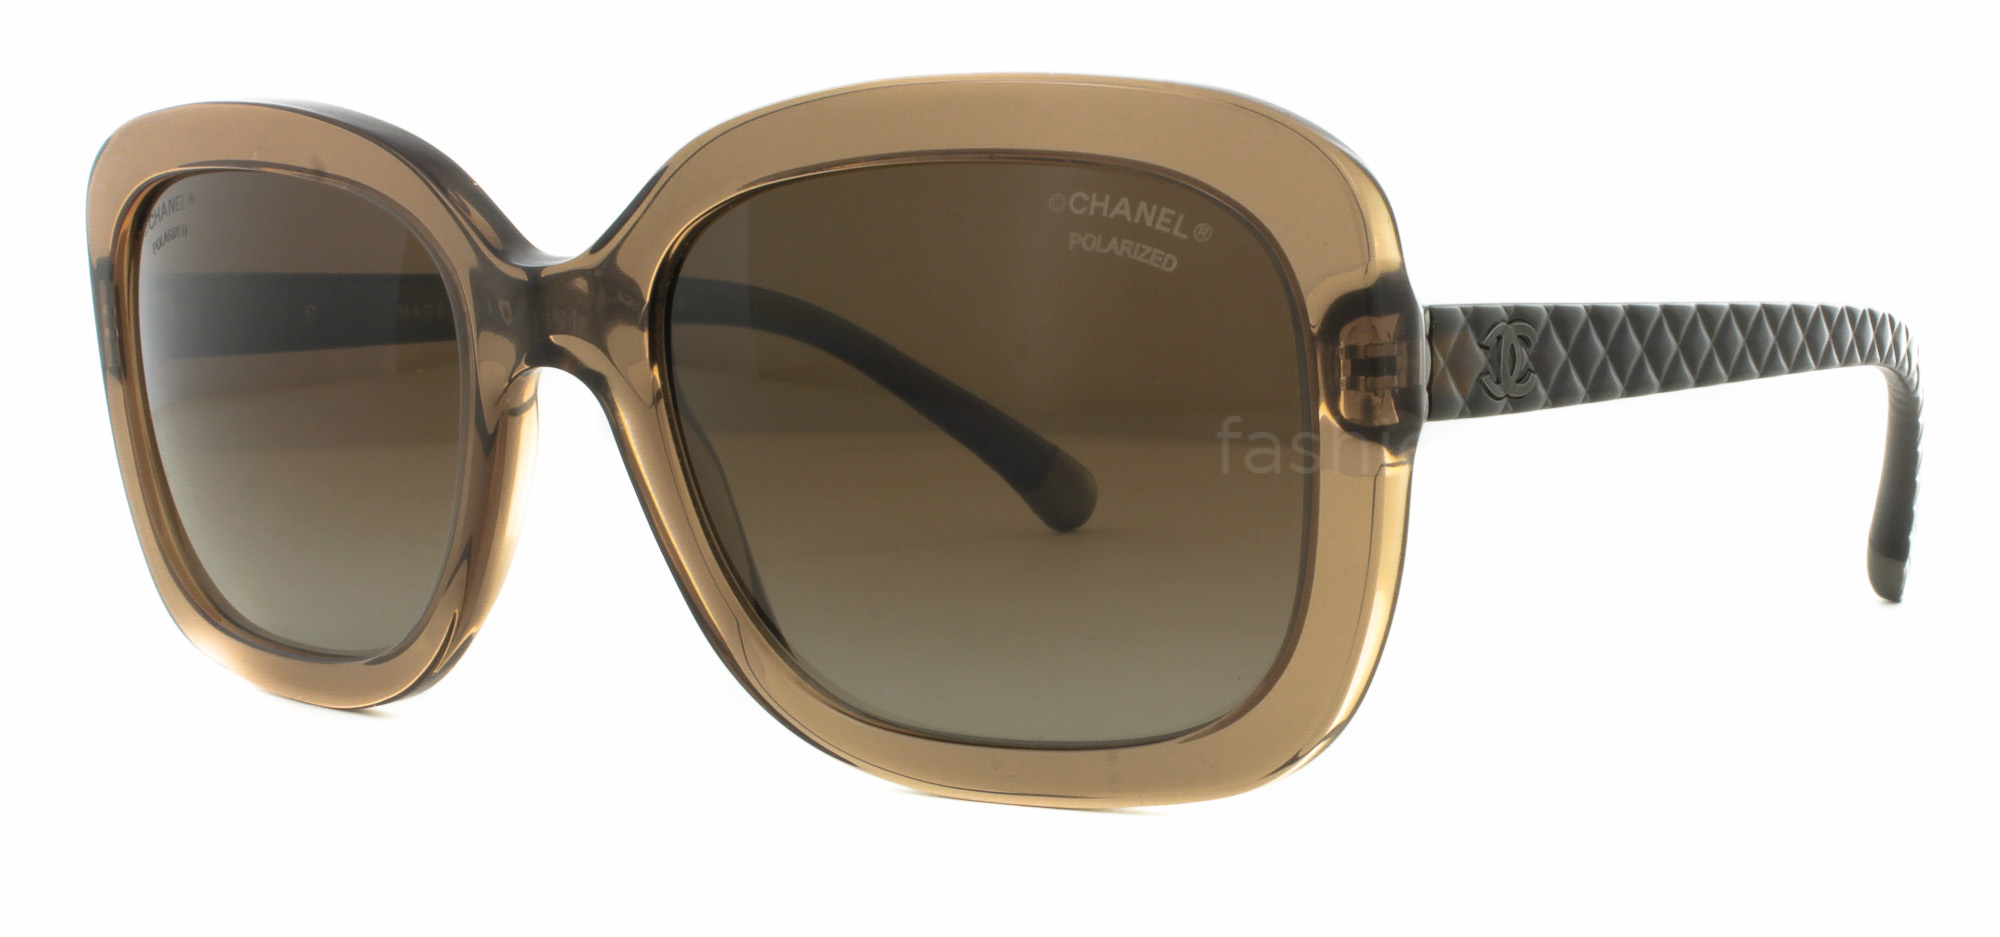 CLEARANCE CHANEL 5329 1529S9